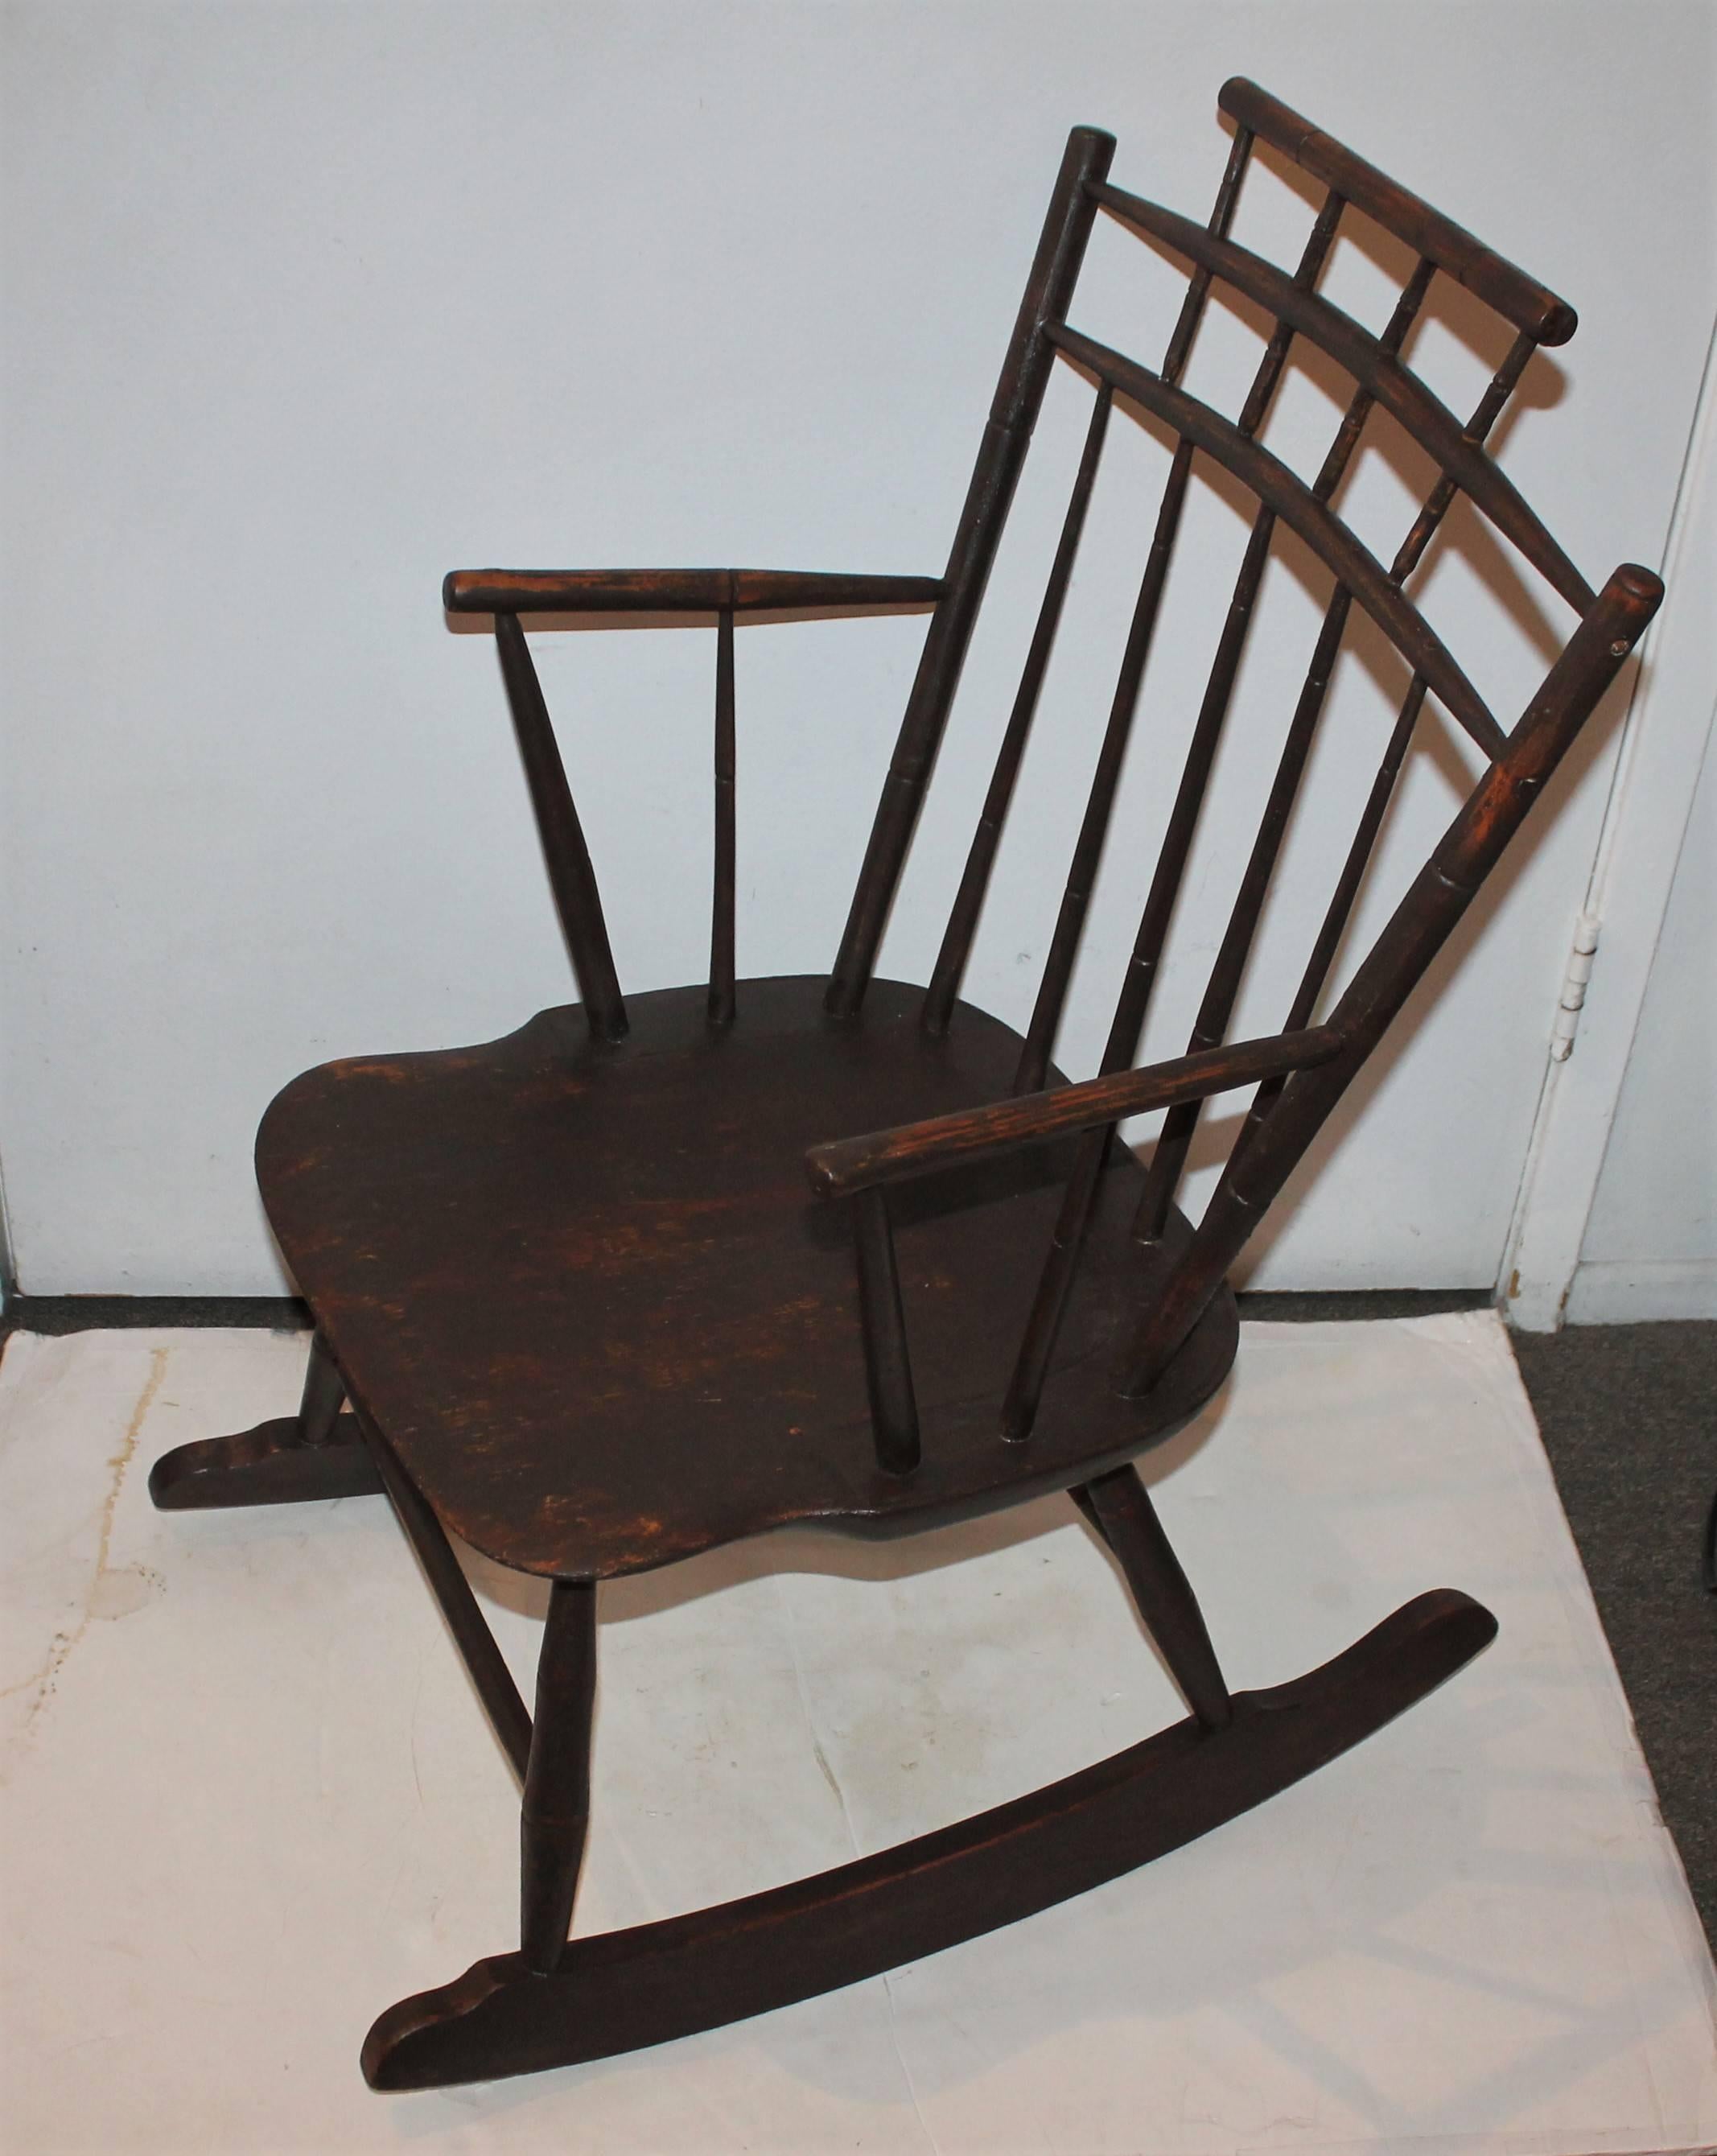 19th century high back windsor rocker has bamboo turnings and has a brown painted surface. The condition is very good.